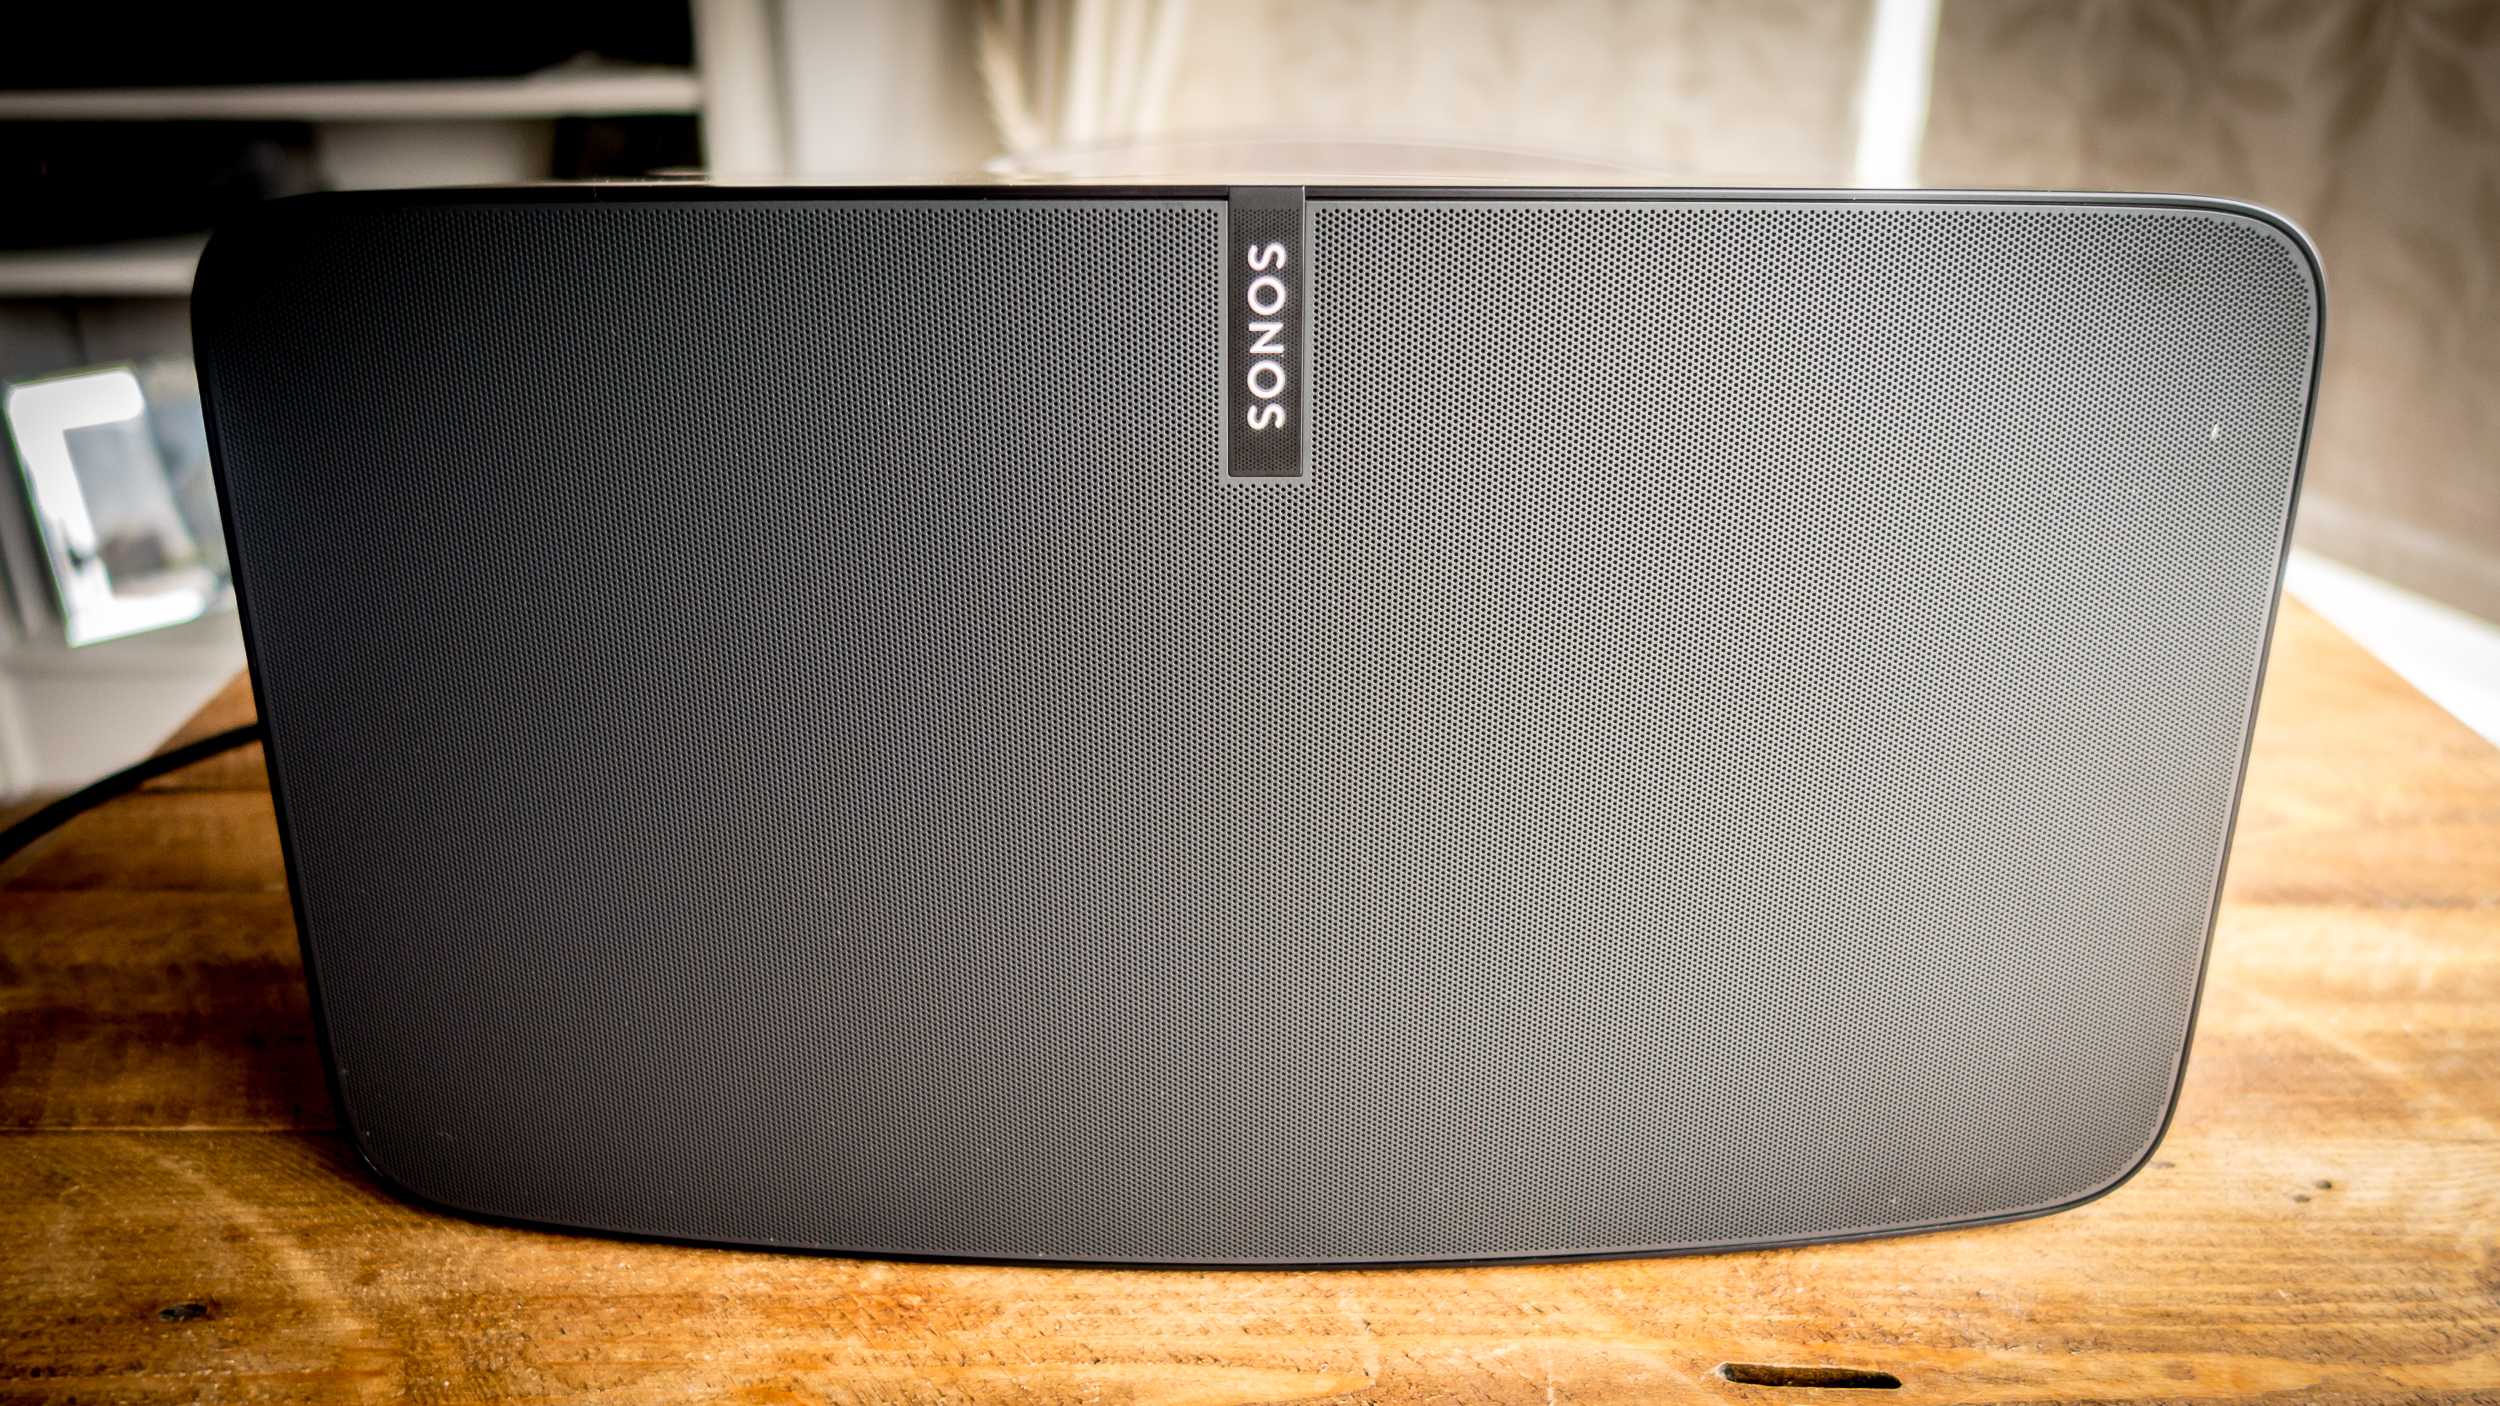 Sonos Play:5 best-sounding wireless speaker system ever used | Ars Technica